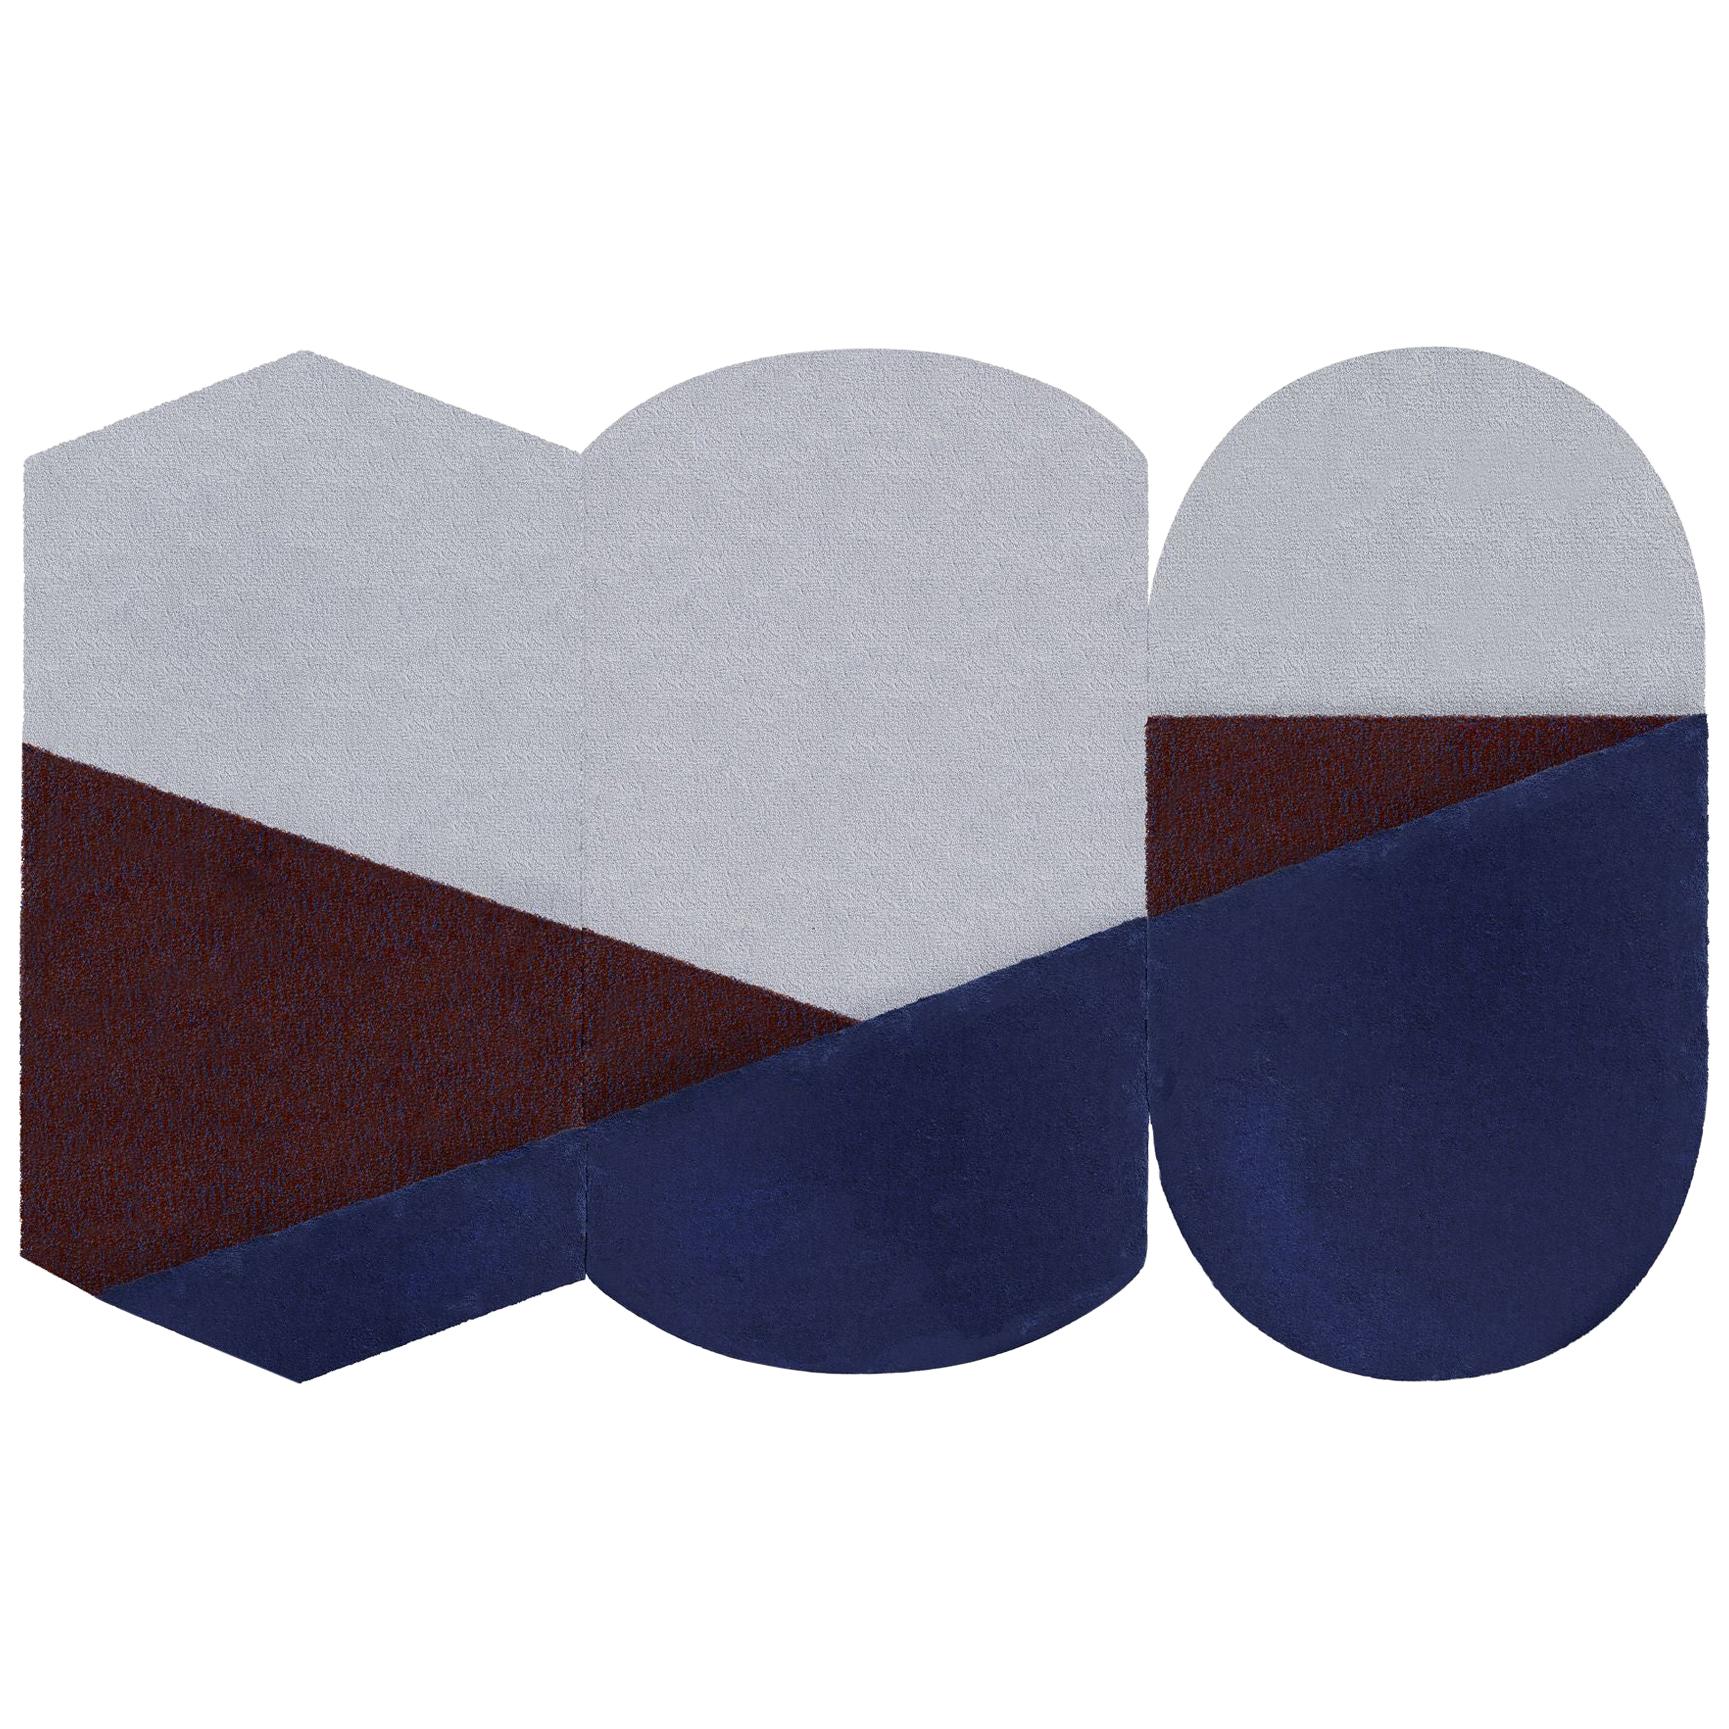 Oci Triptych S, Composition of 3 Rugs 100% Wool /Blue and Brick by Portego